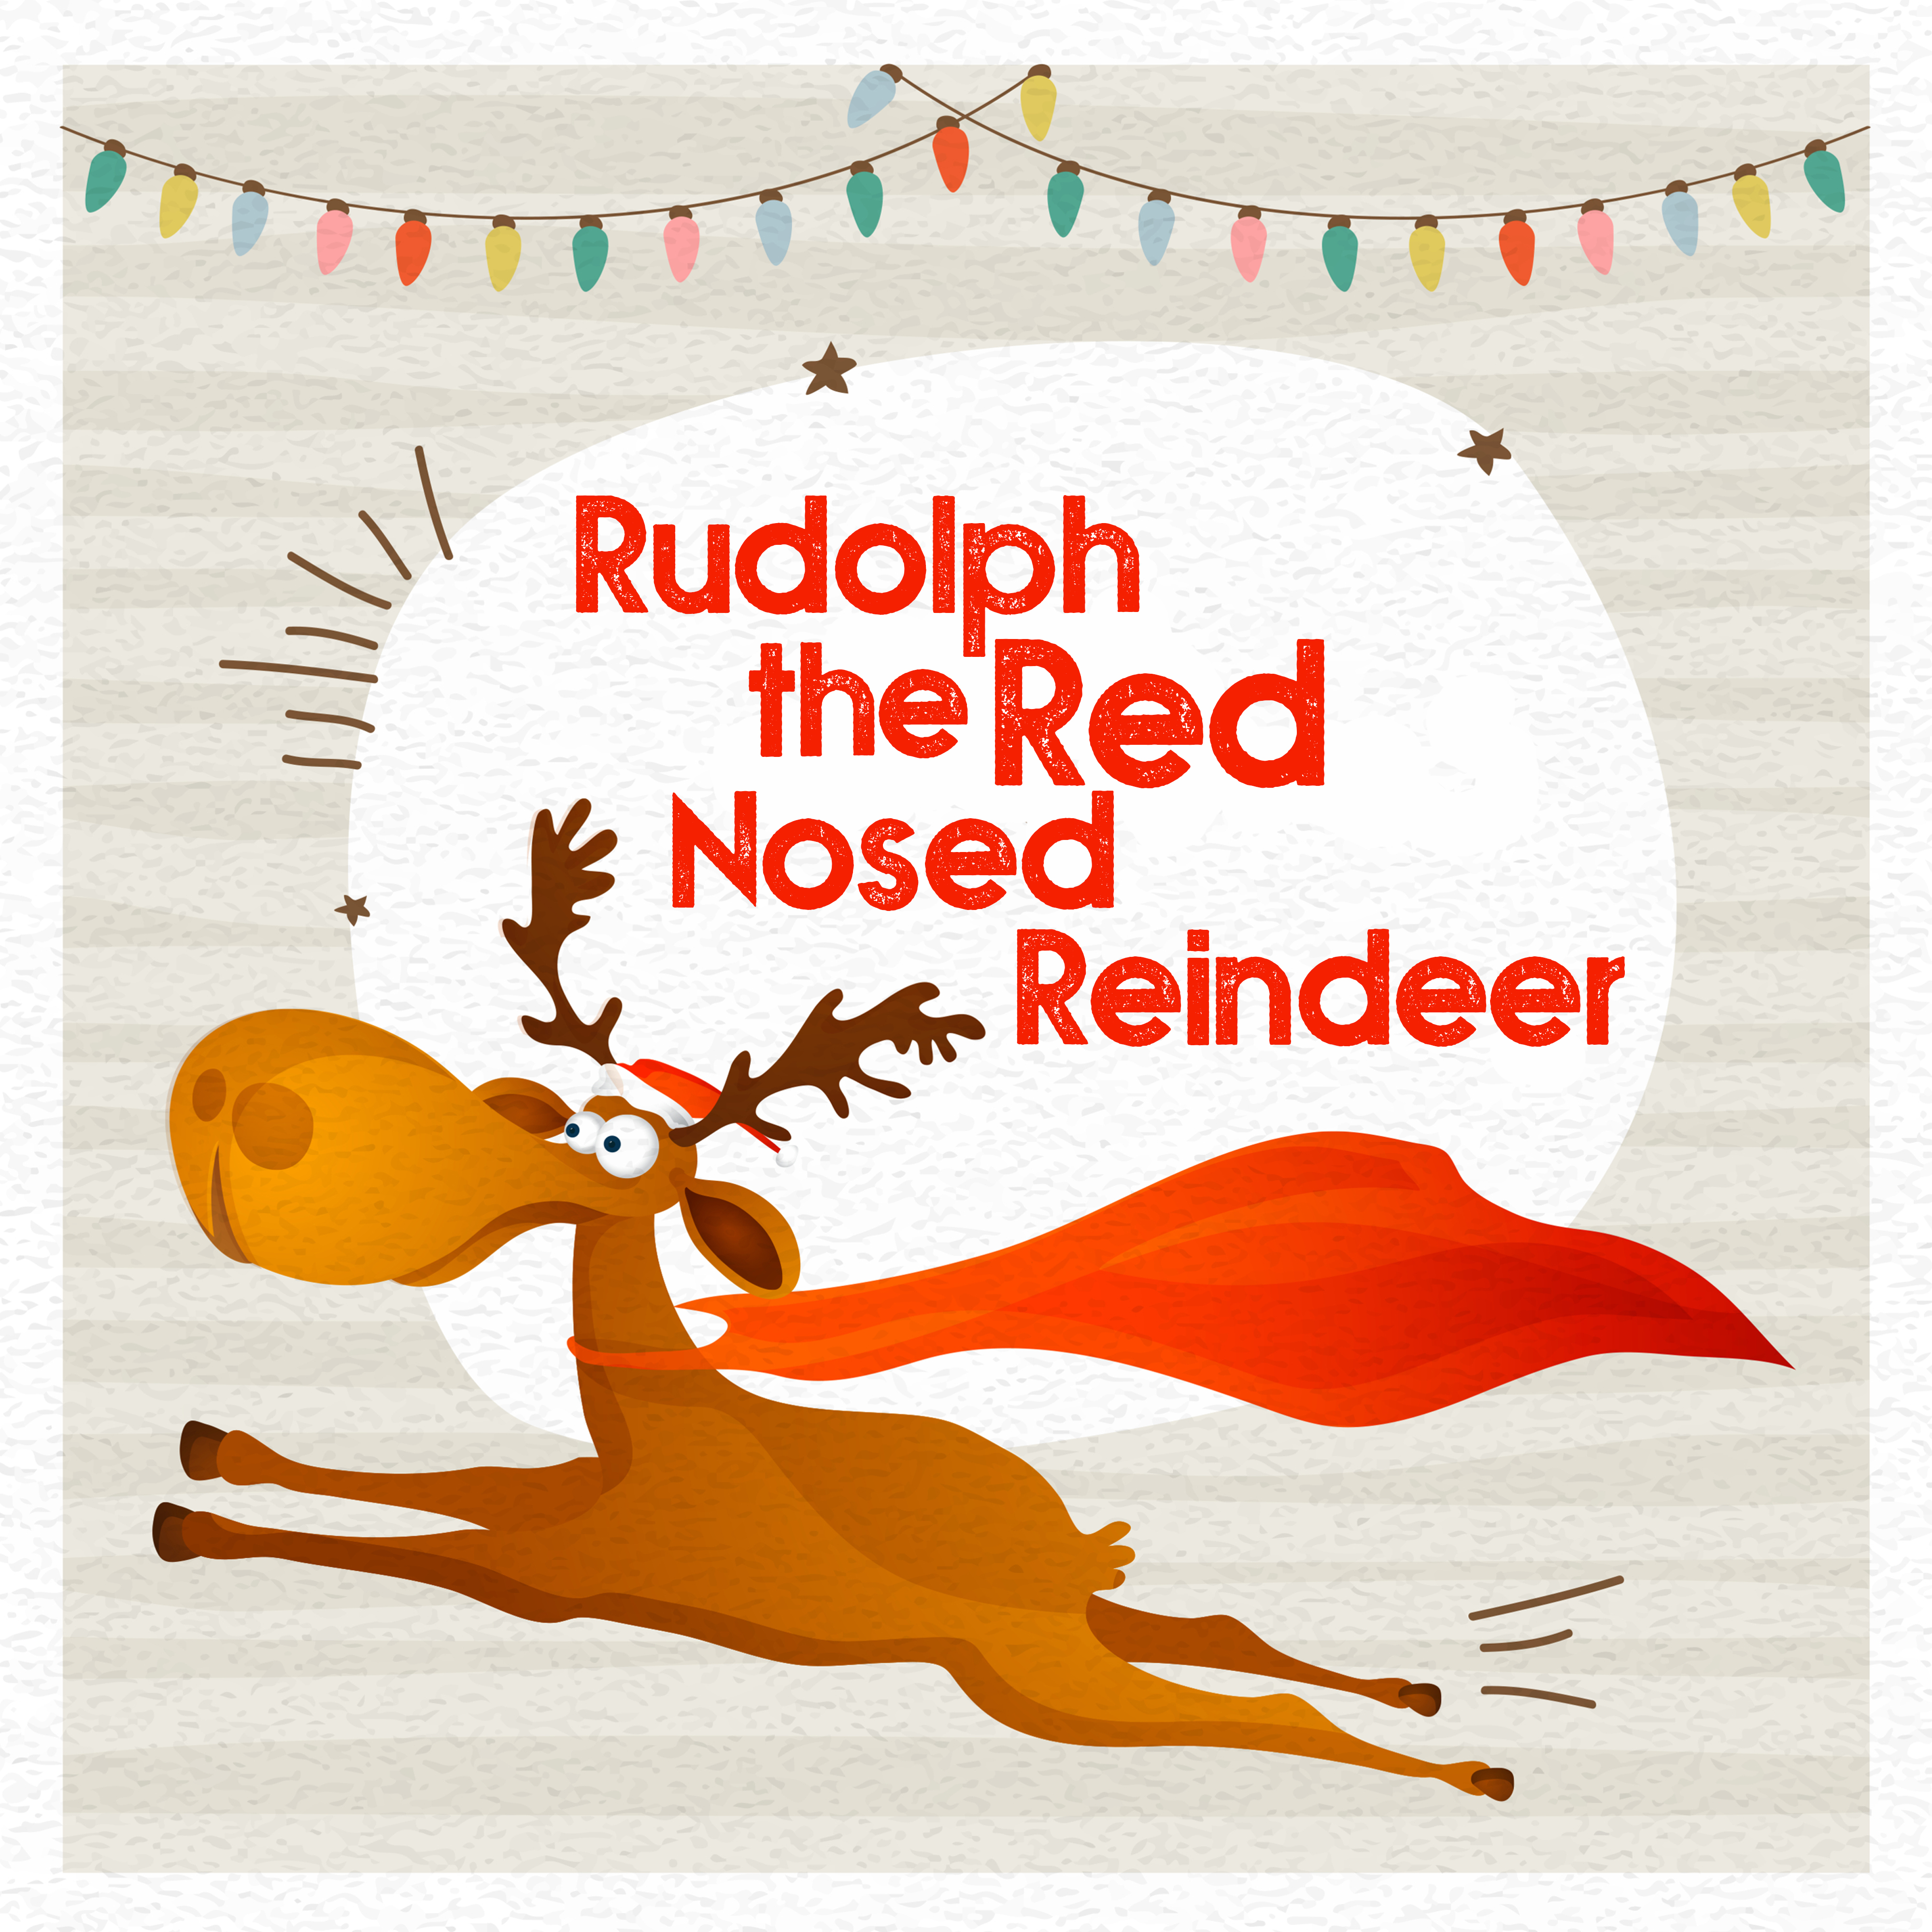 Rudolph the Red Nosed Reindeer – Beautiful Christmas Songs for Children, Traditional Carols, Happy Holidays with Family, Magic Time